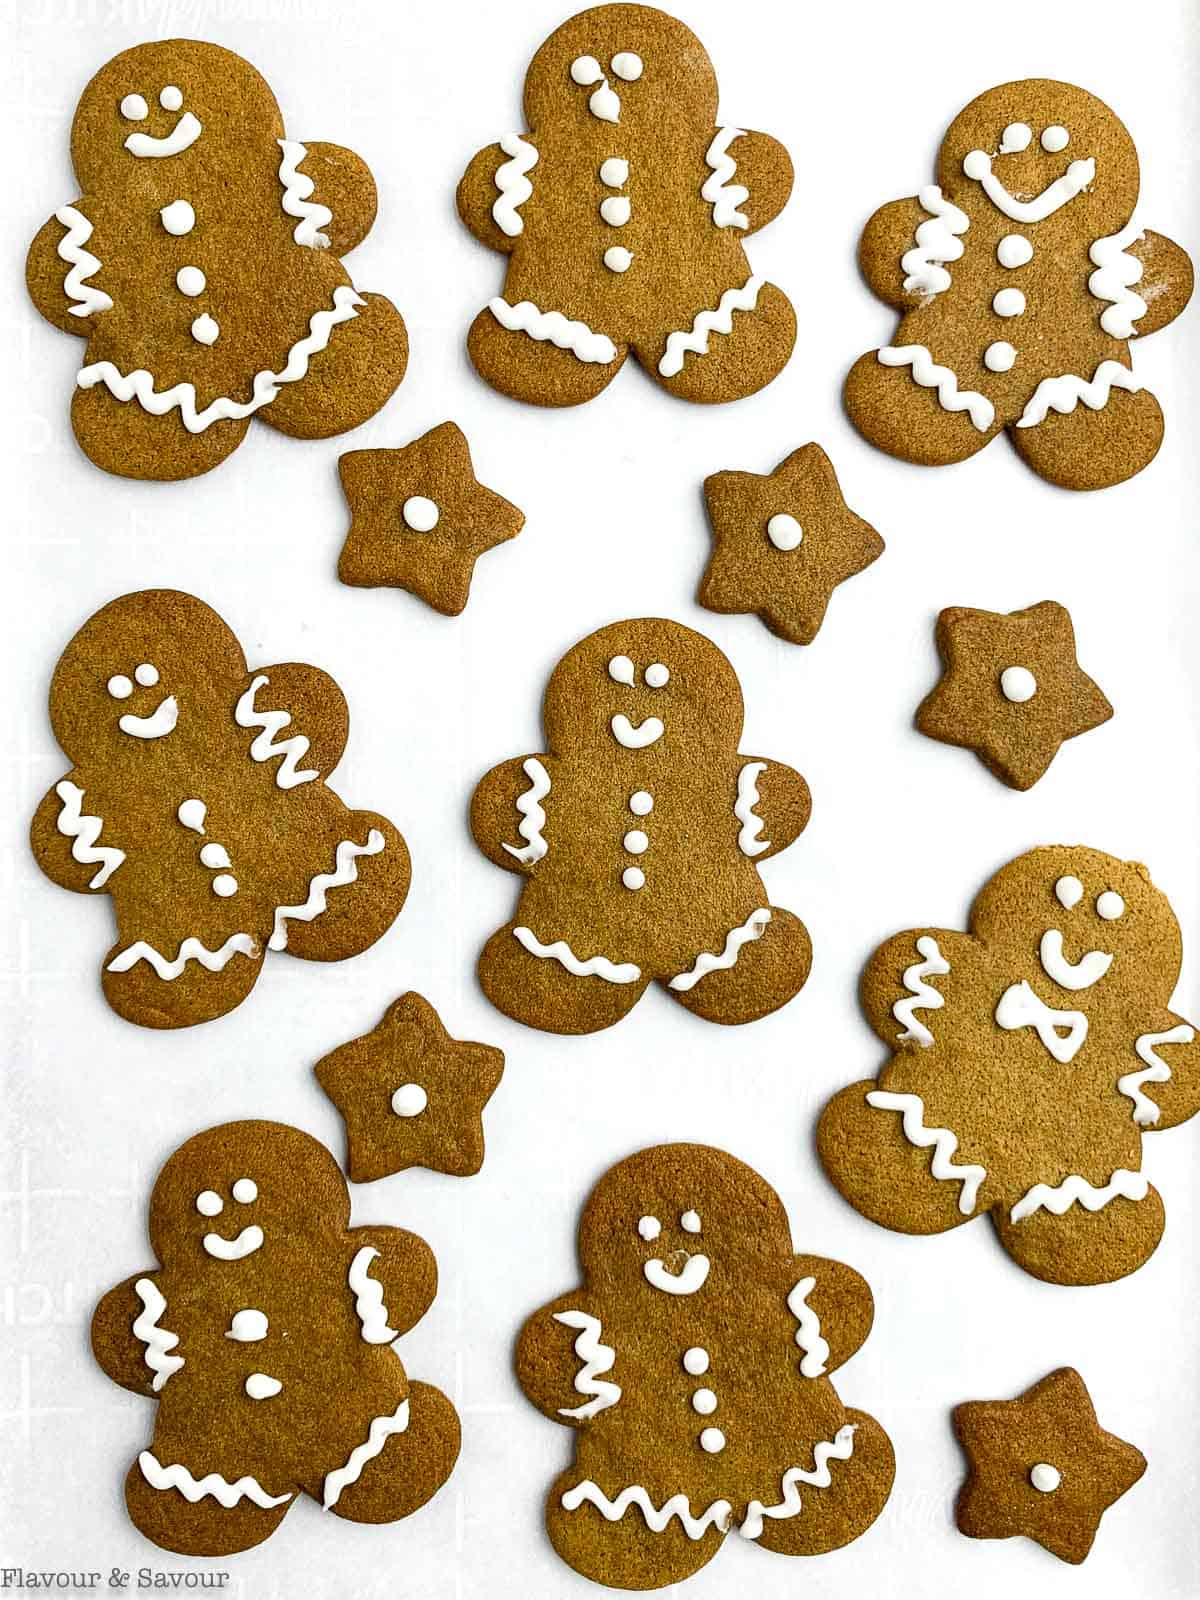 decorated gingerbread cut-out cookies